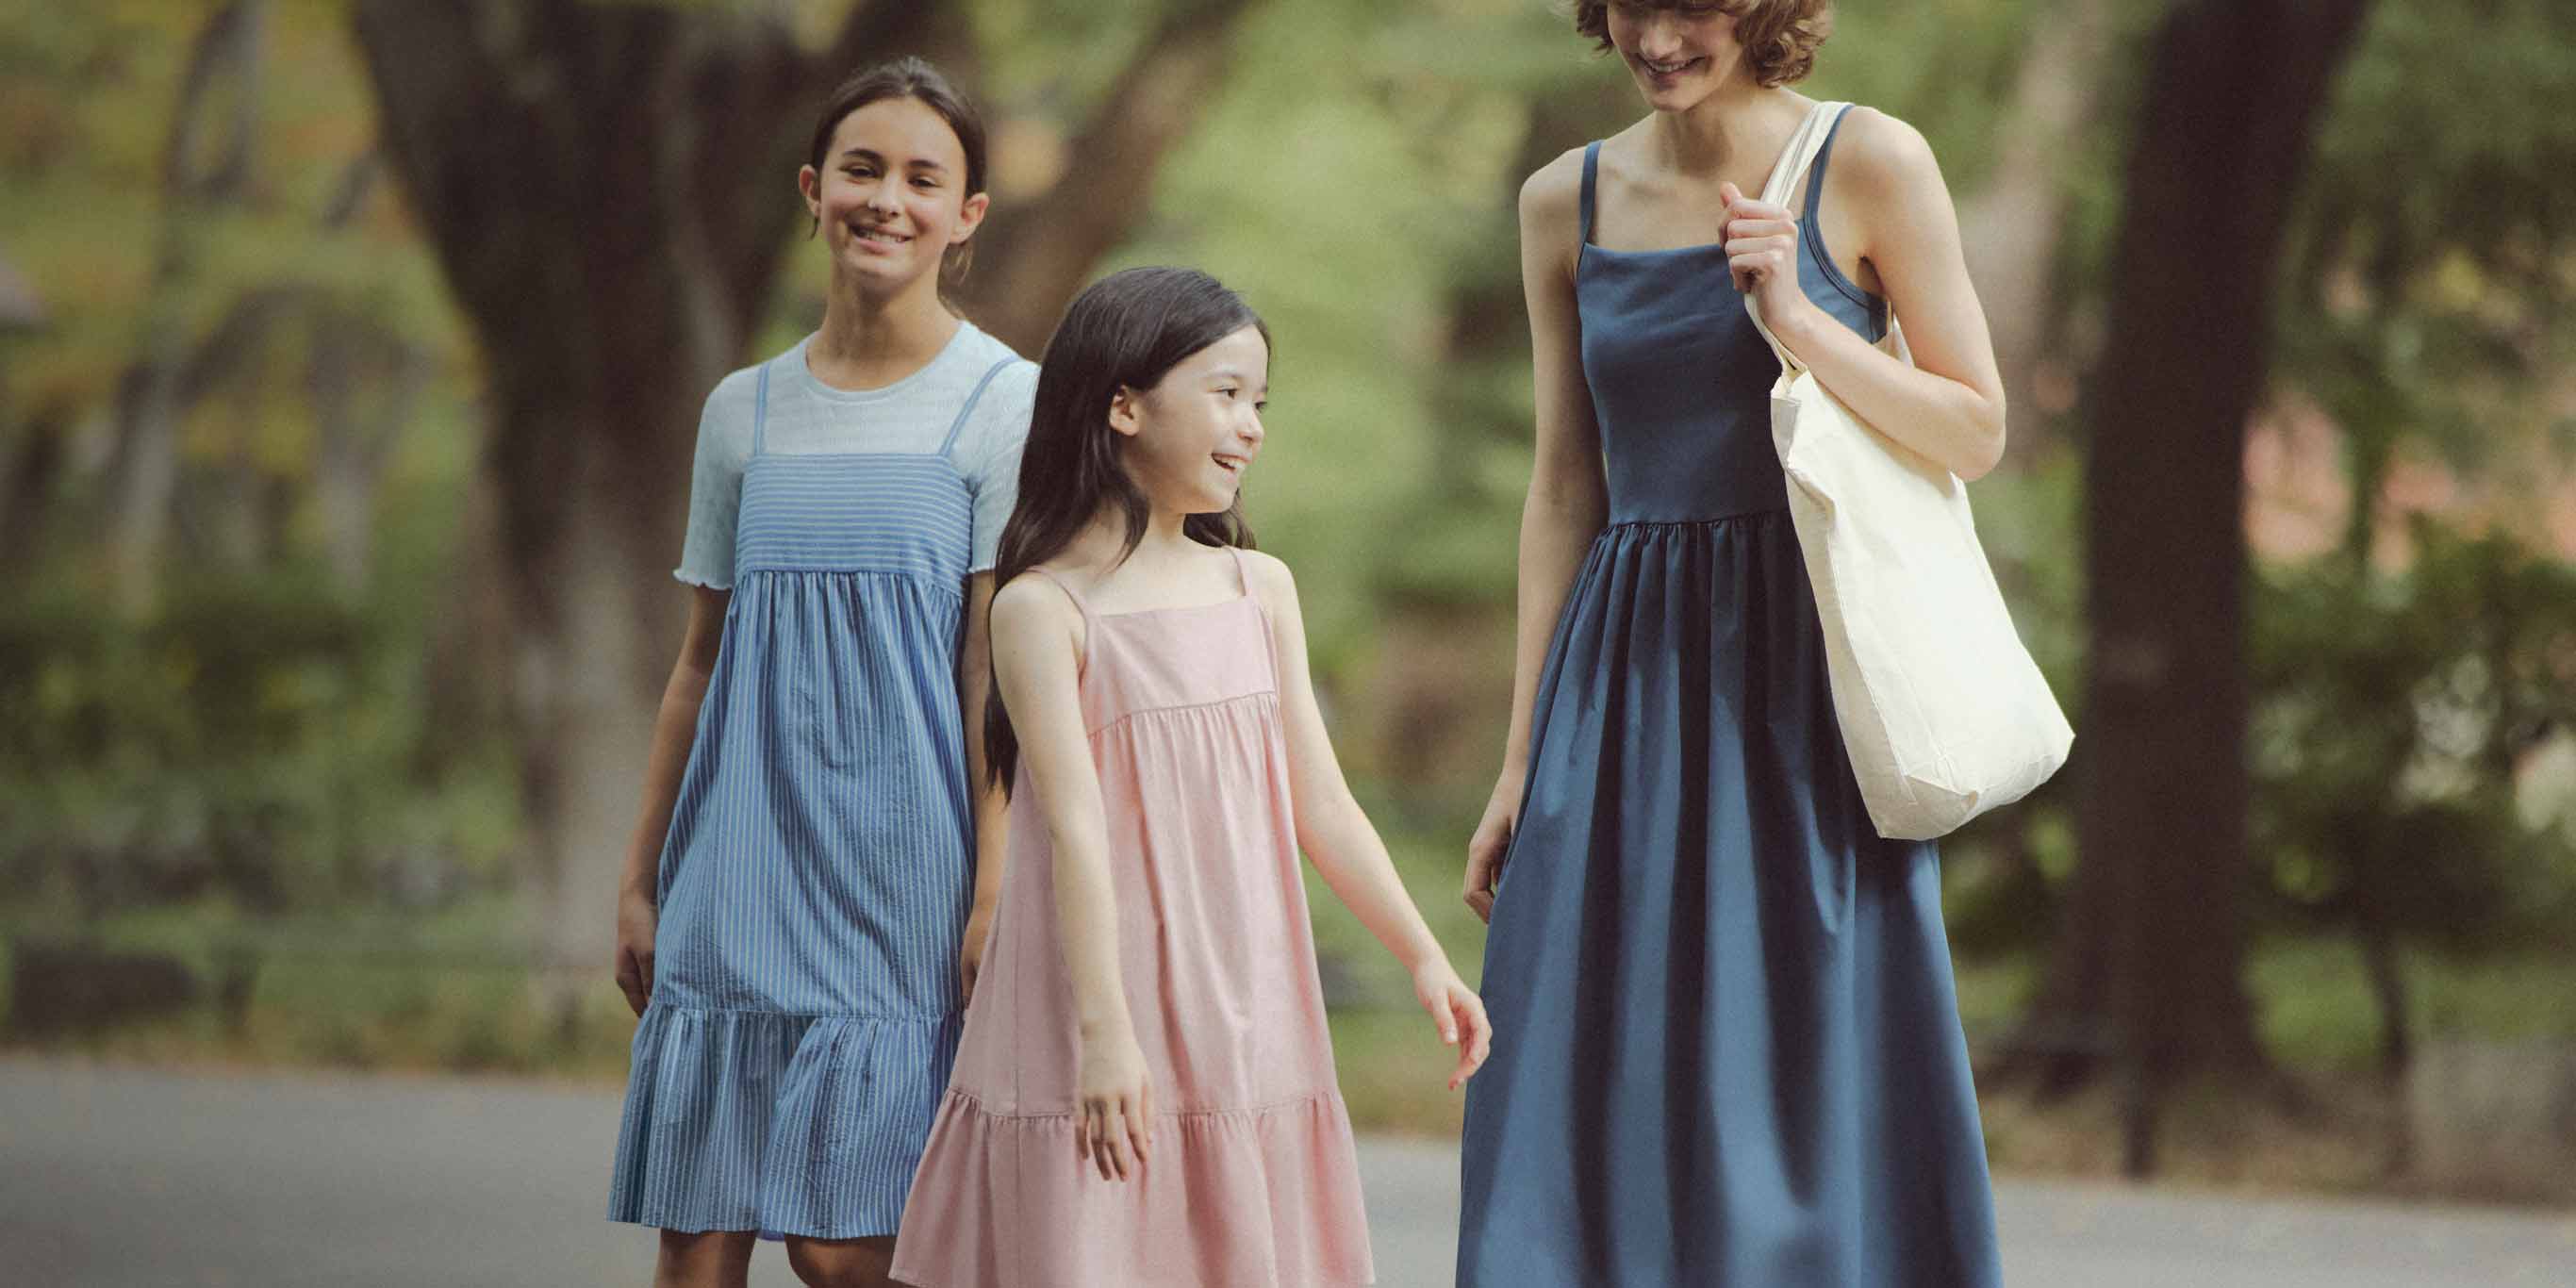 Shop our lineup of kid-approved dresses 
with added comfort functionalities.